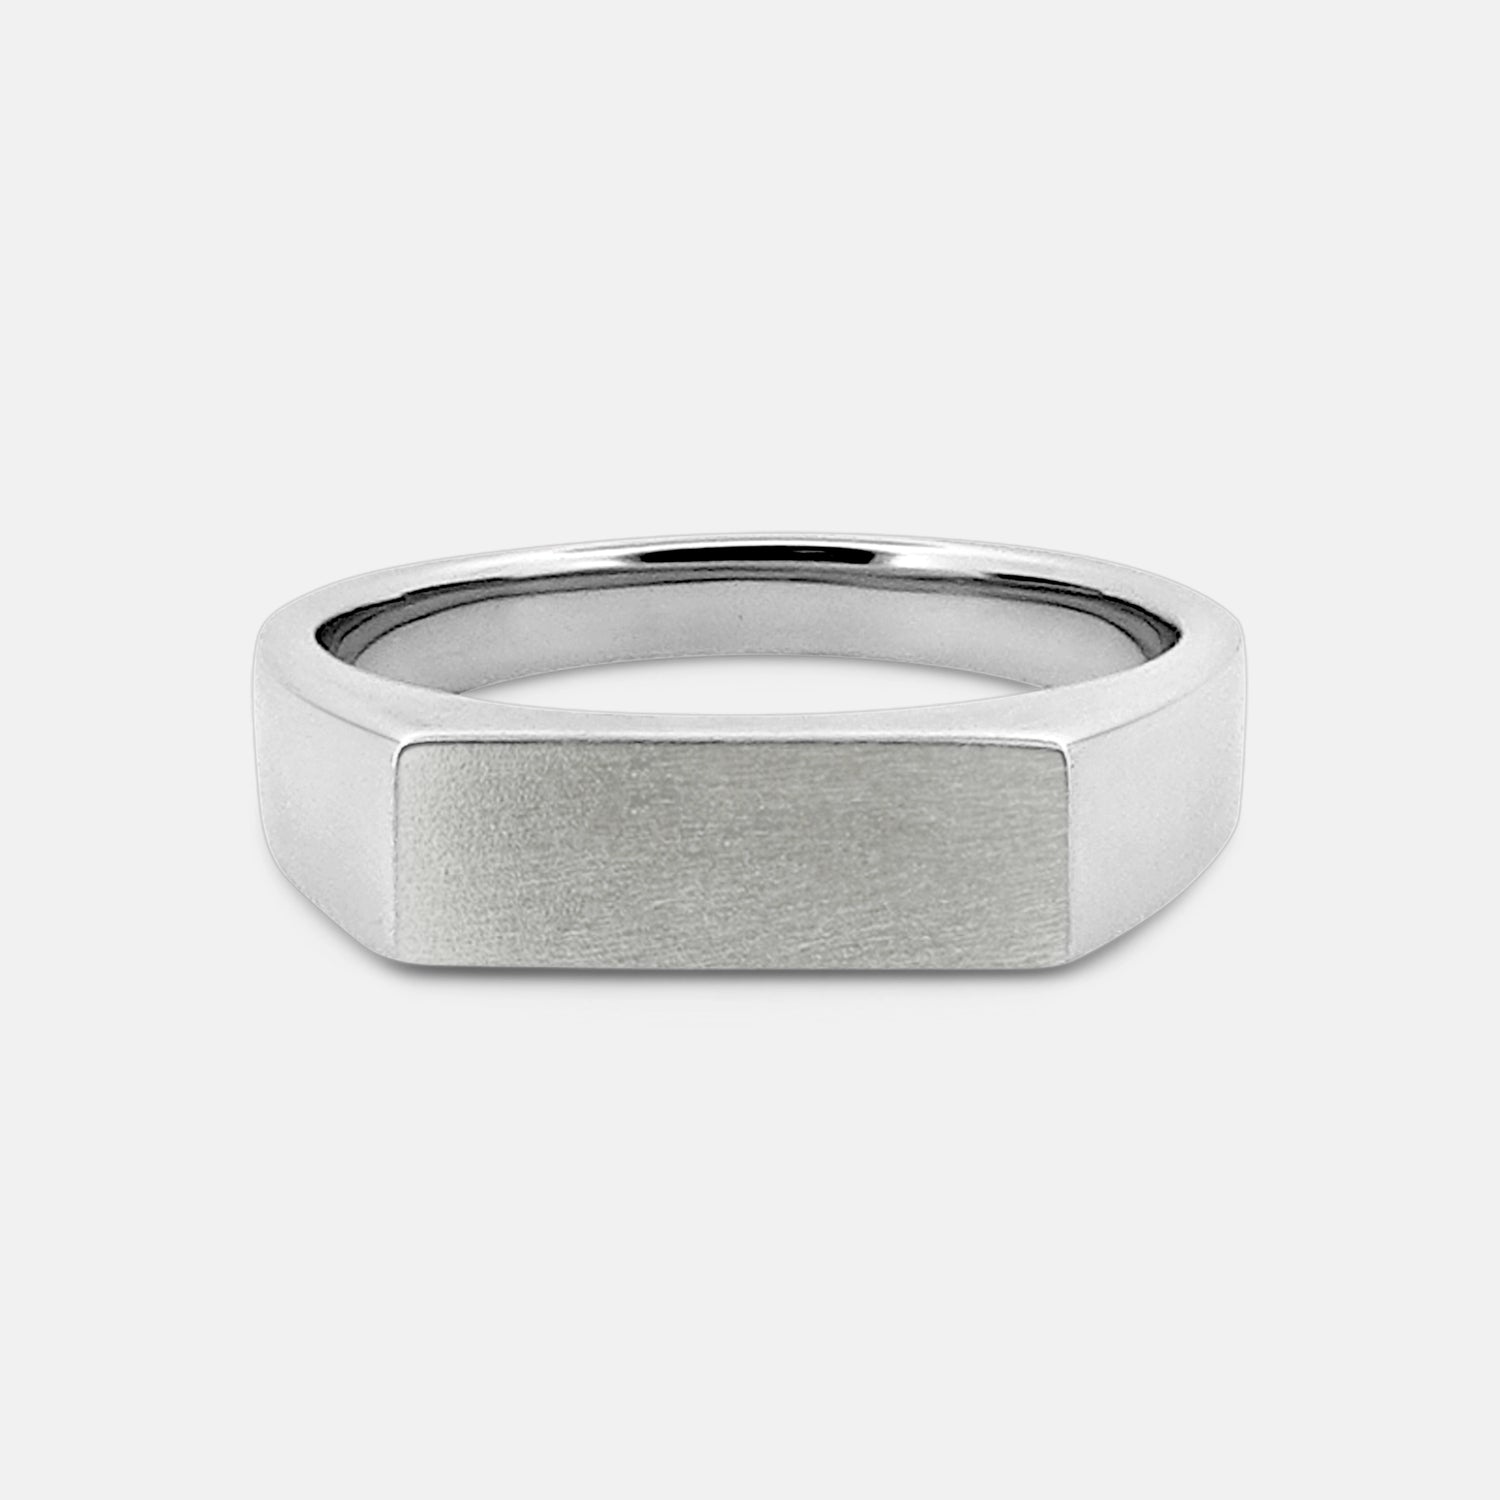 front view of 925 silver rhodium plated rectangular signet ring